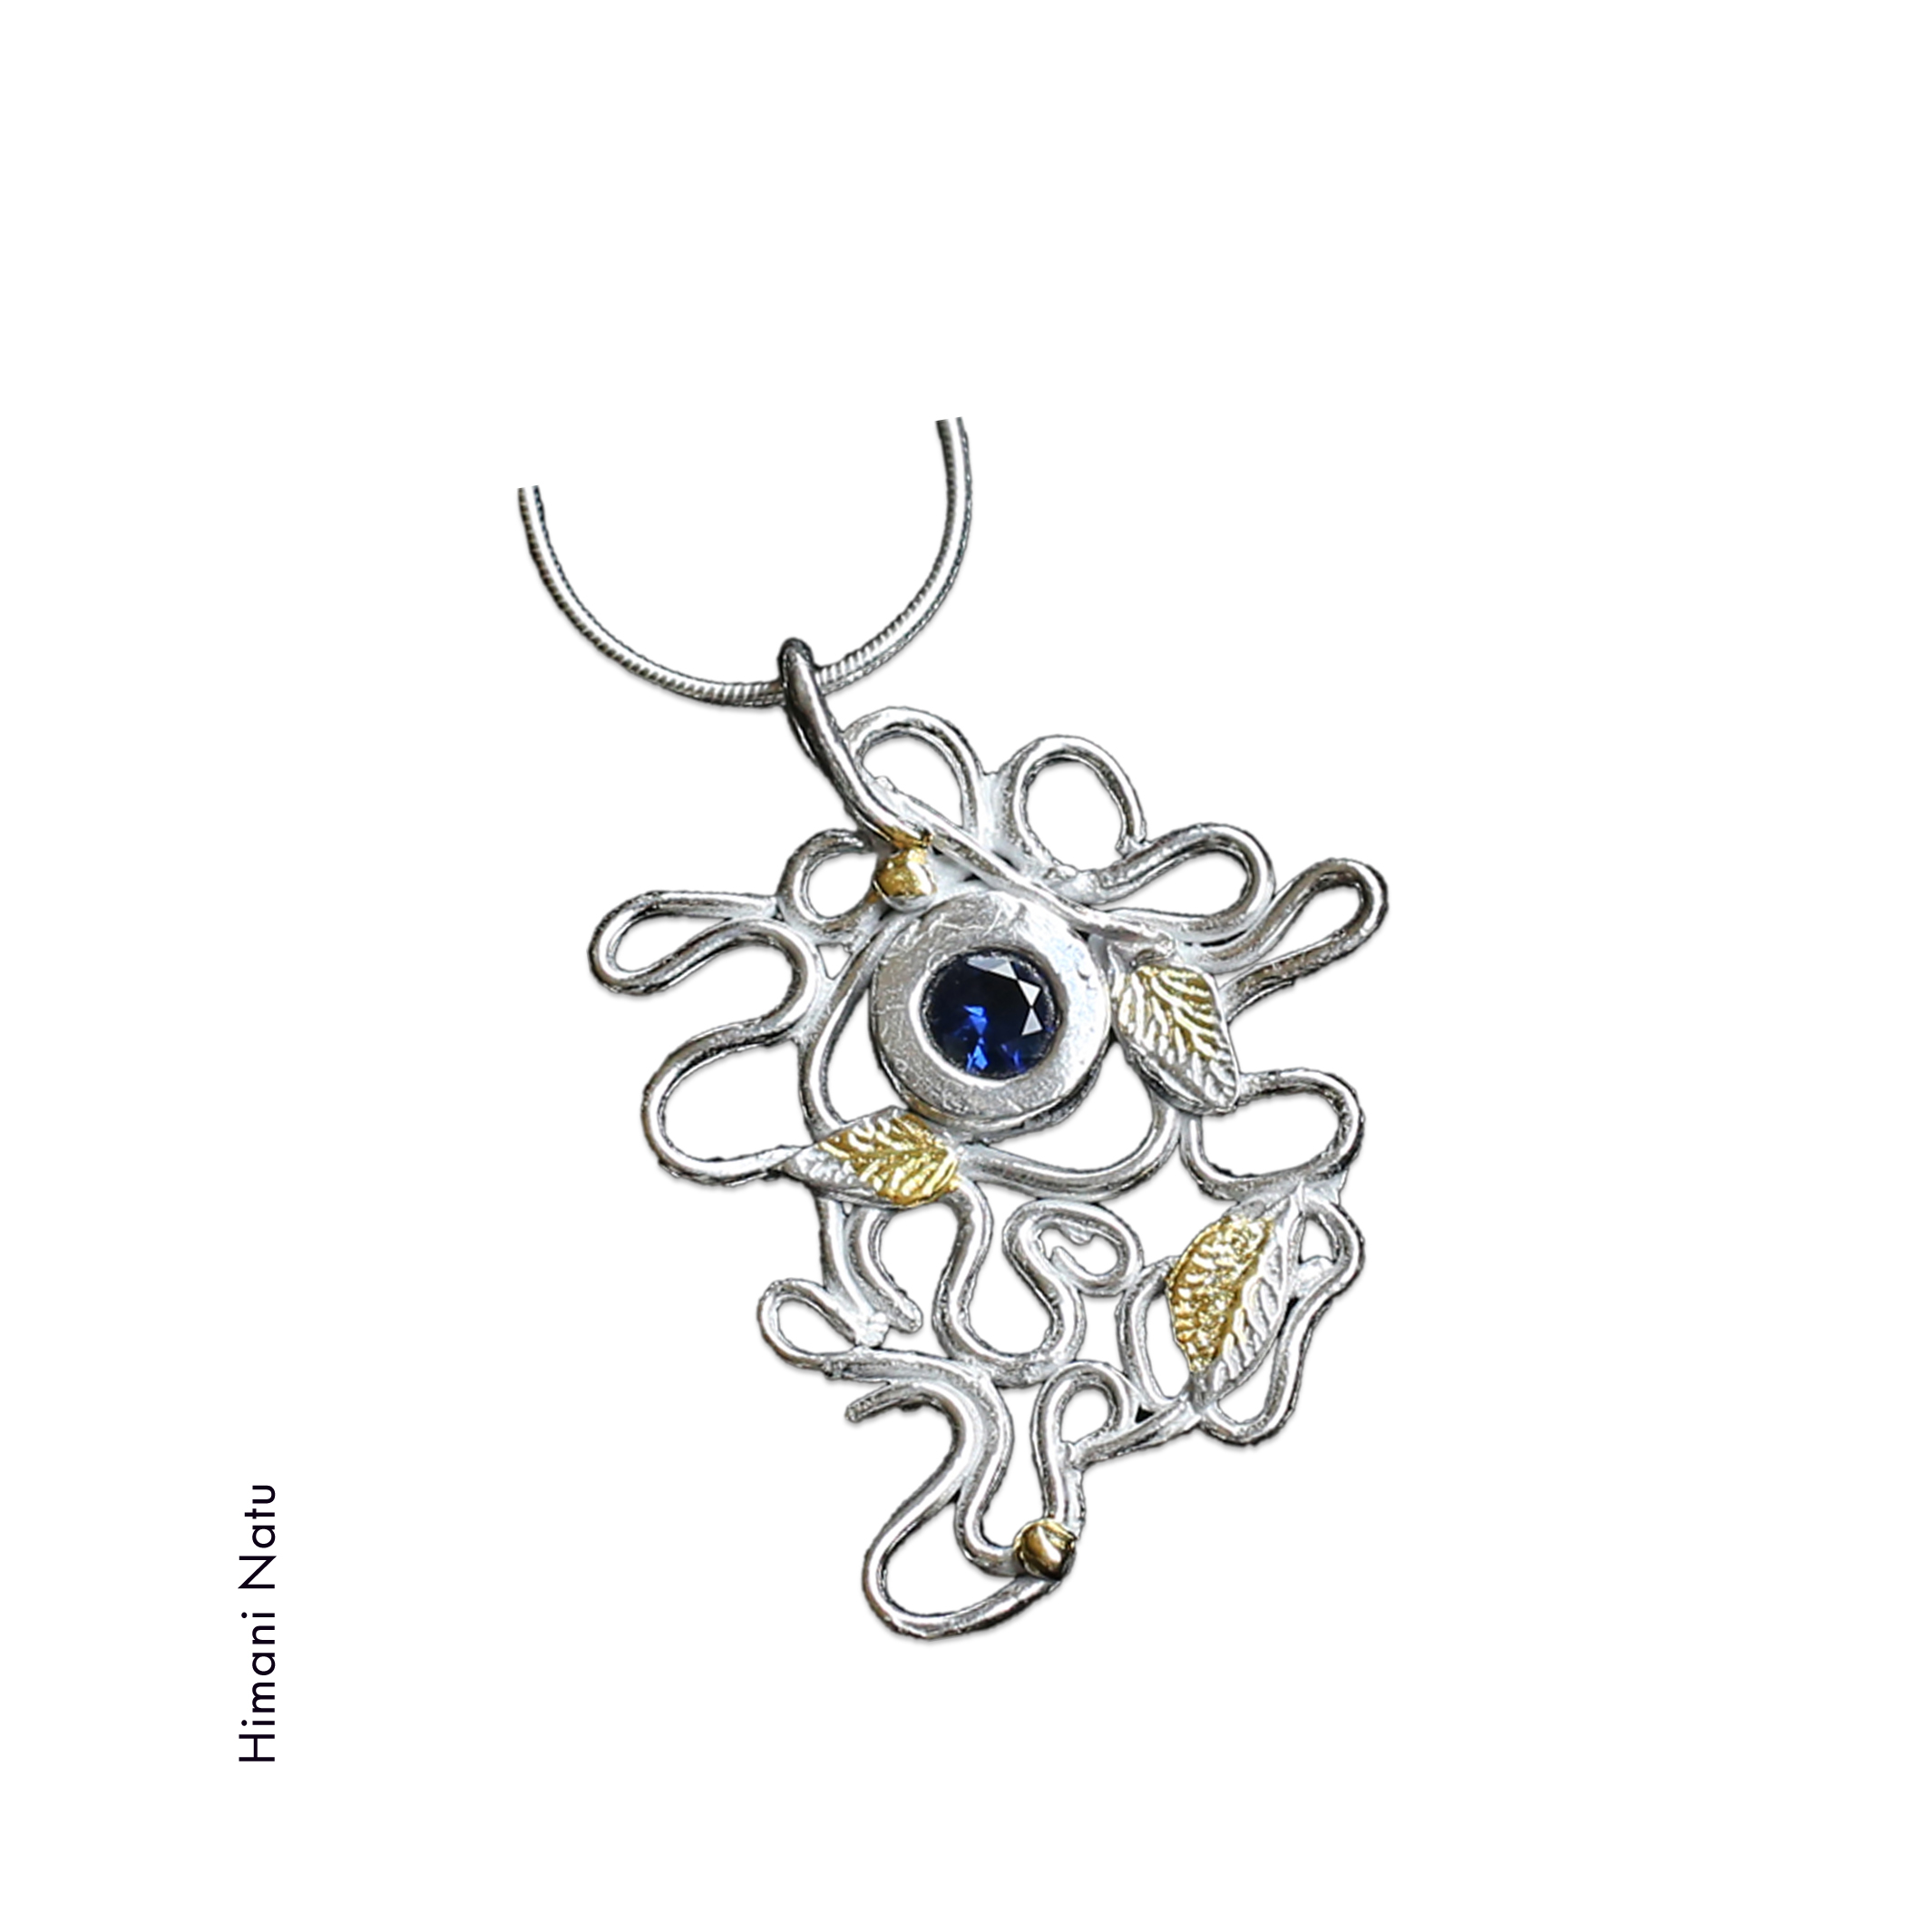 necklace with blue stone in the center, 3 formed leaves with gold accents and squiggles of silver by Himani Natu